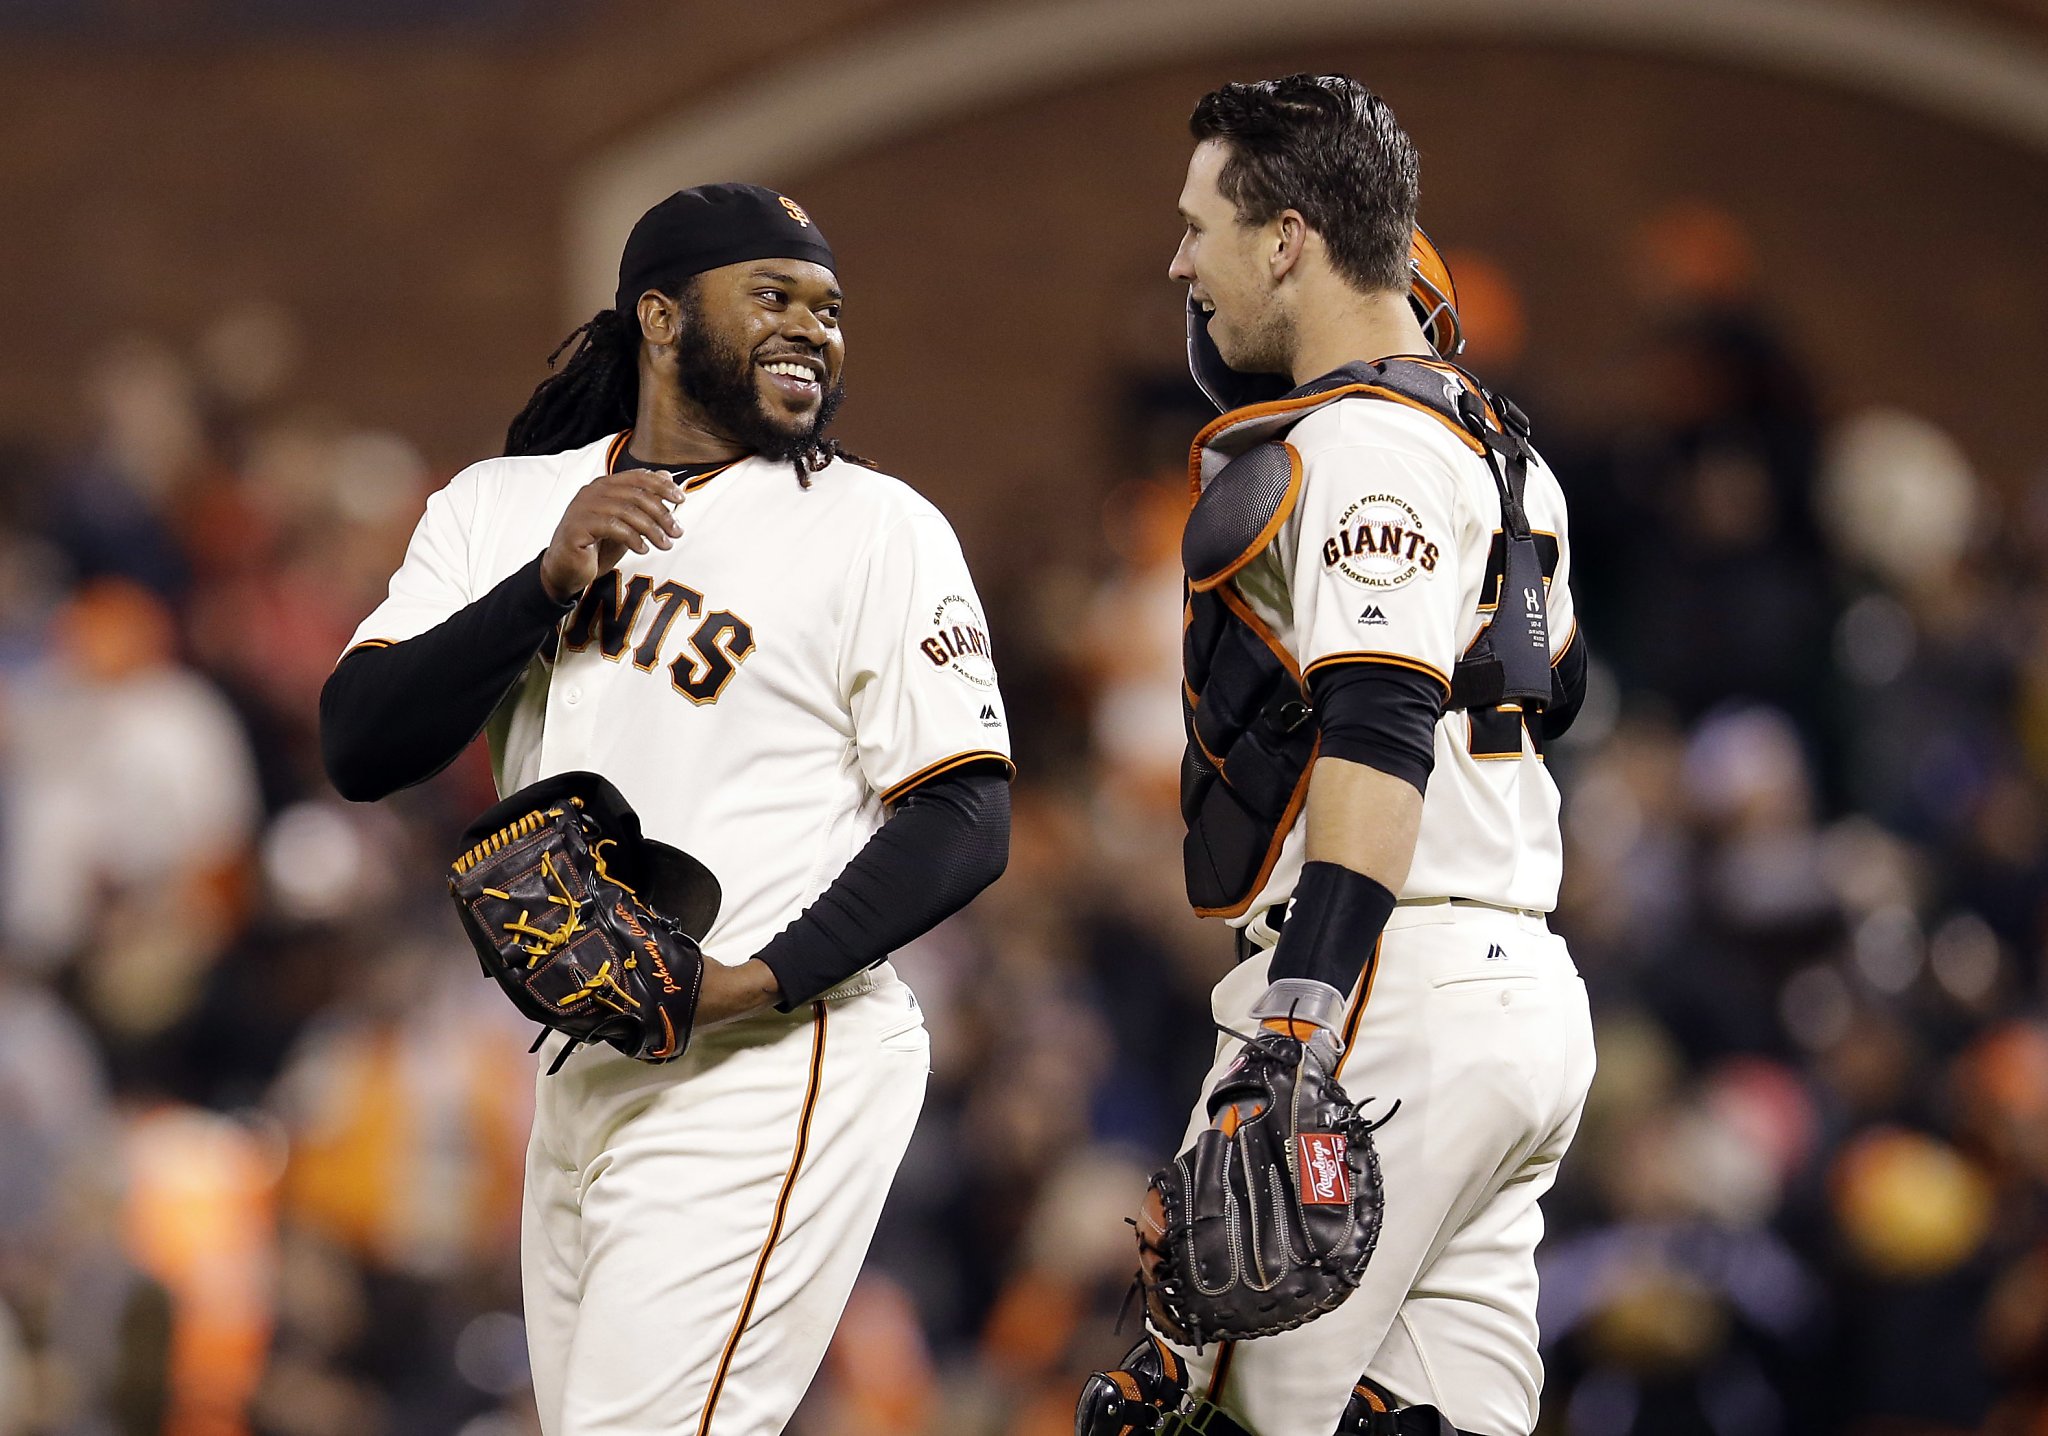 Giants hope Johnny Cueto can arrive soon, be ready for Opening Day